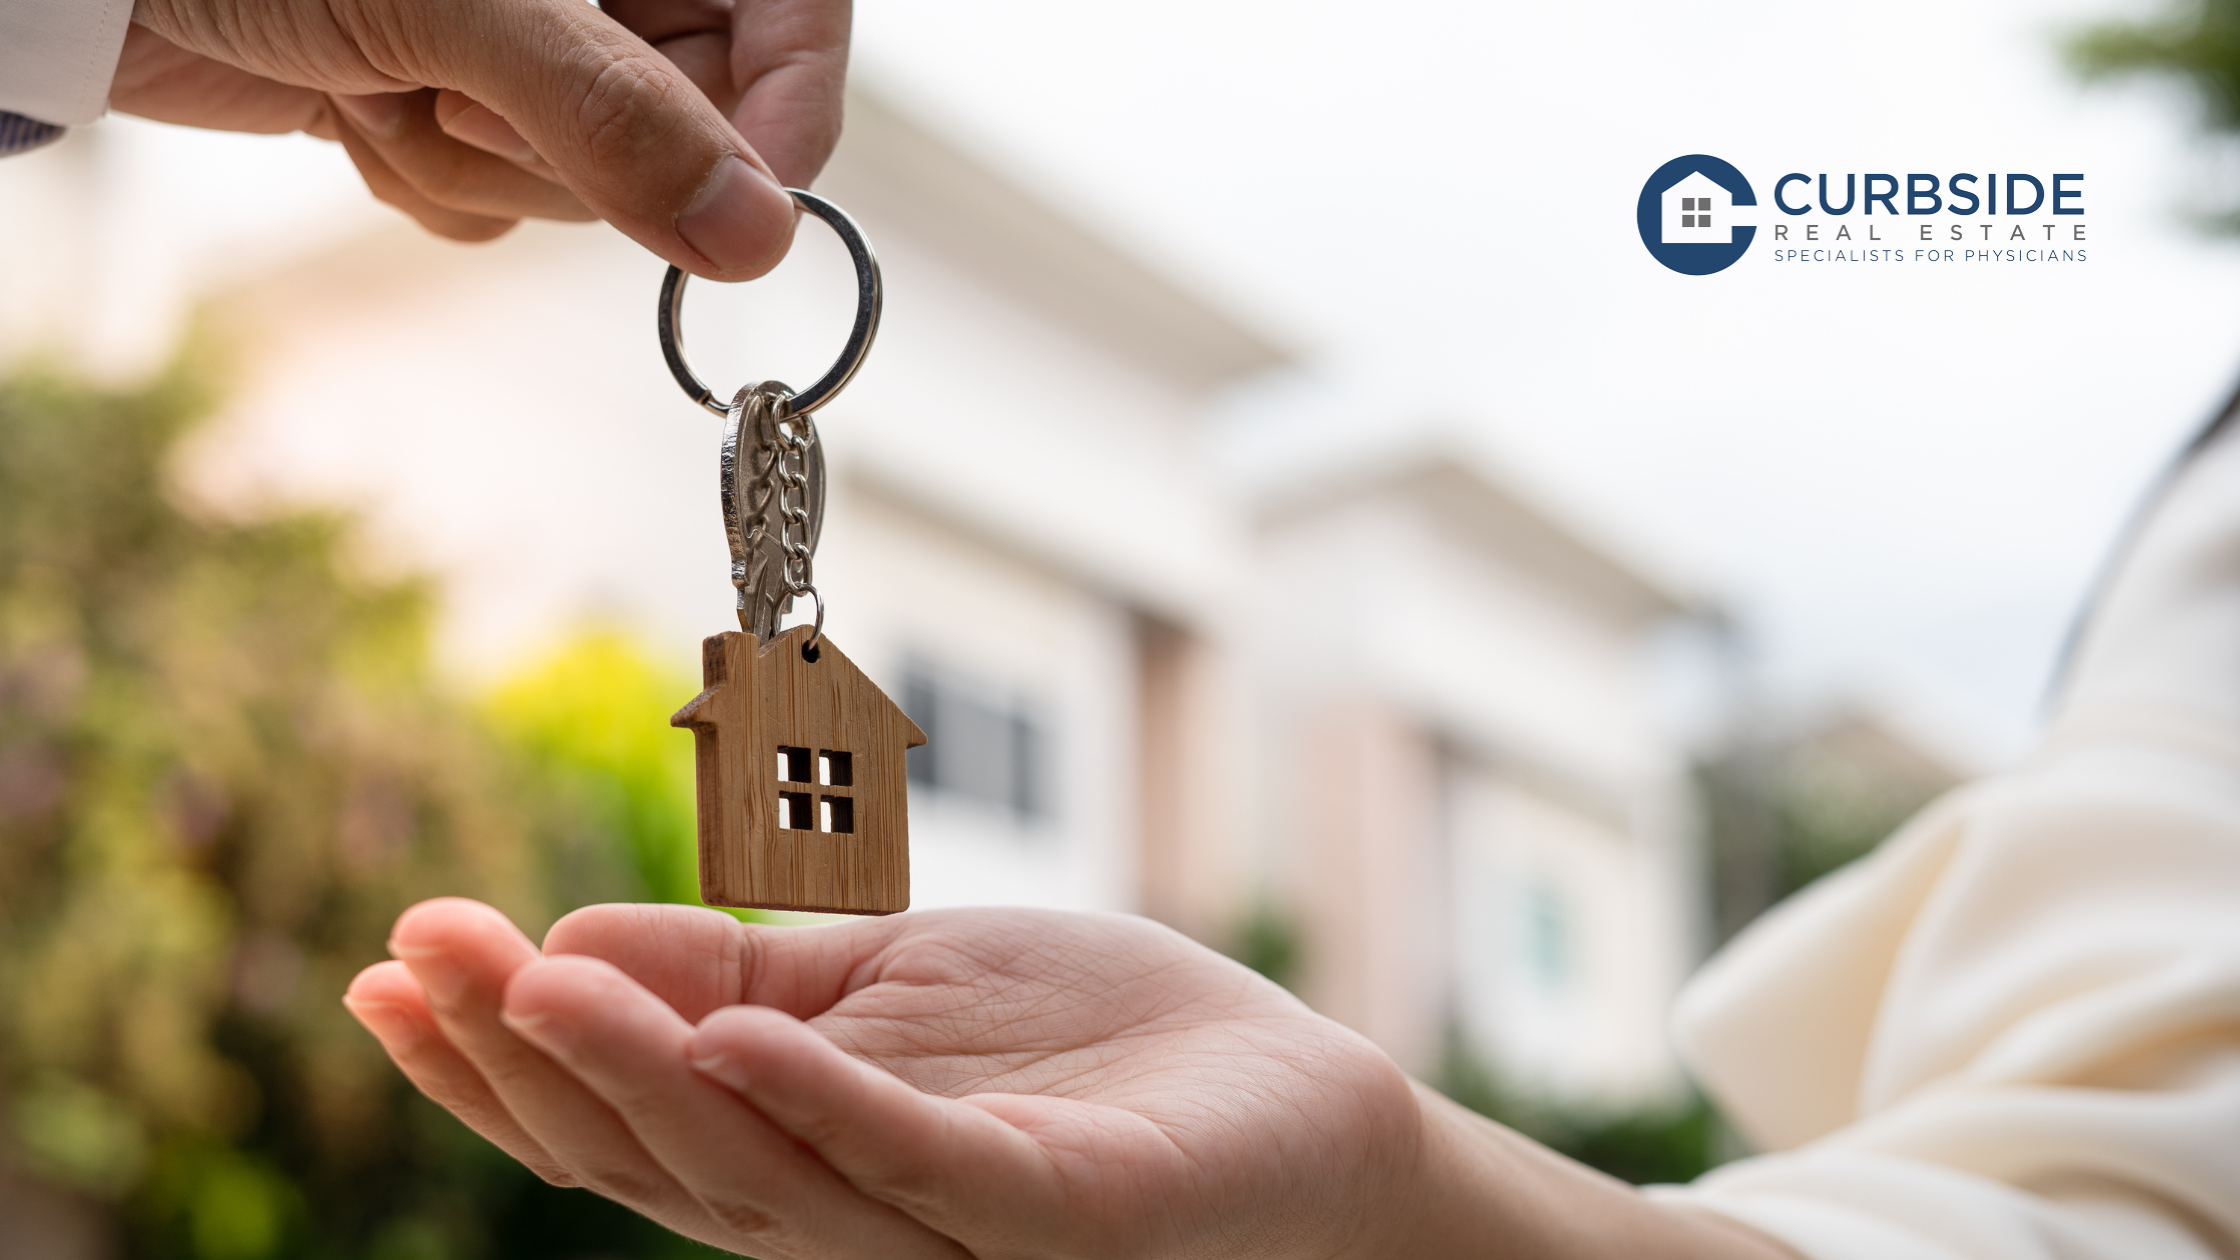 Handing a key to your new home